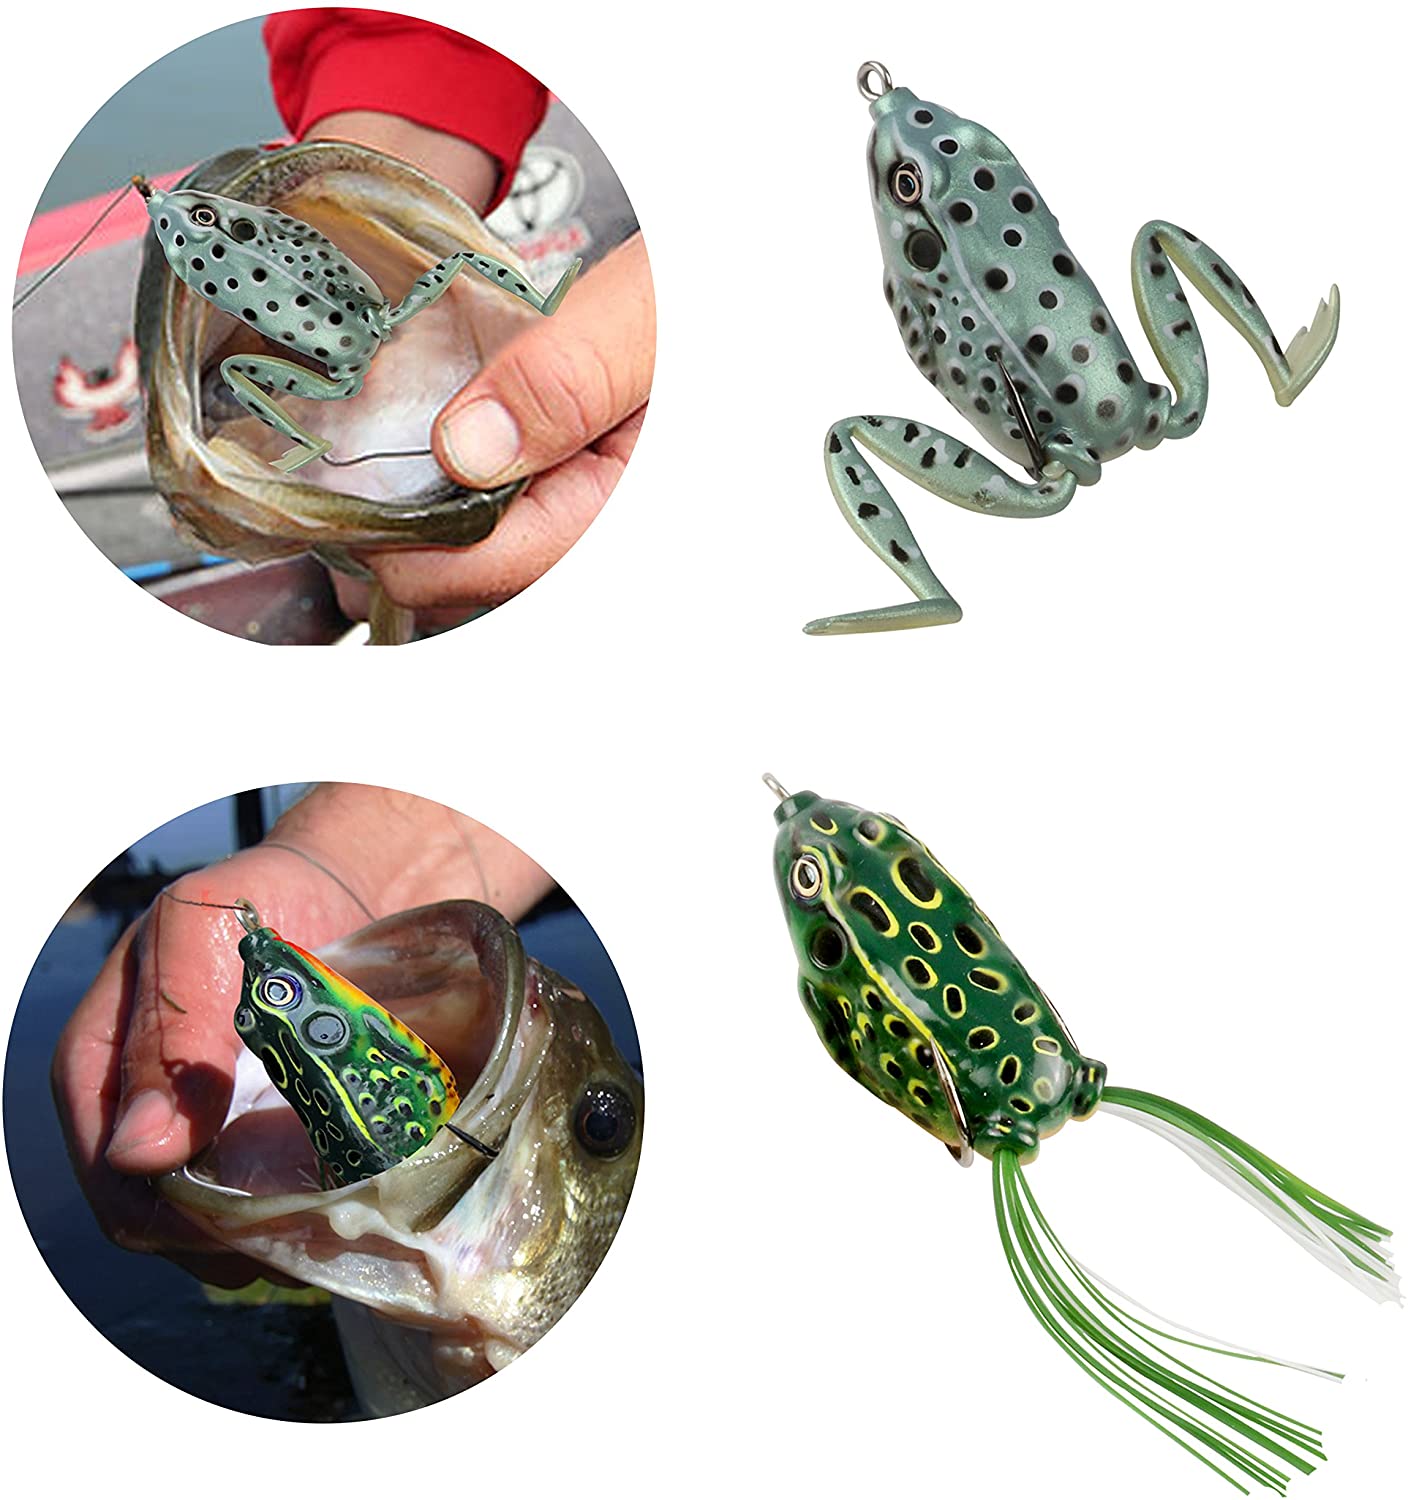  RUNCL Topwater Frog Lures 5PCS, Durable Lifelike Silicone Bass  Bait, Floating Realistic Frog Lures Kit for Freshwater Saltwater, Topwater Fishing  Lures for Pike Snakehead Salmon Trout Catfish : Sports 